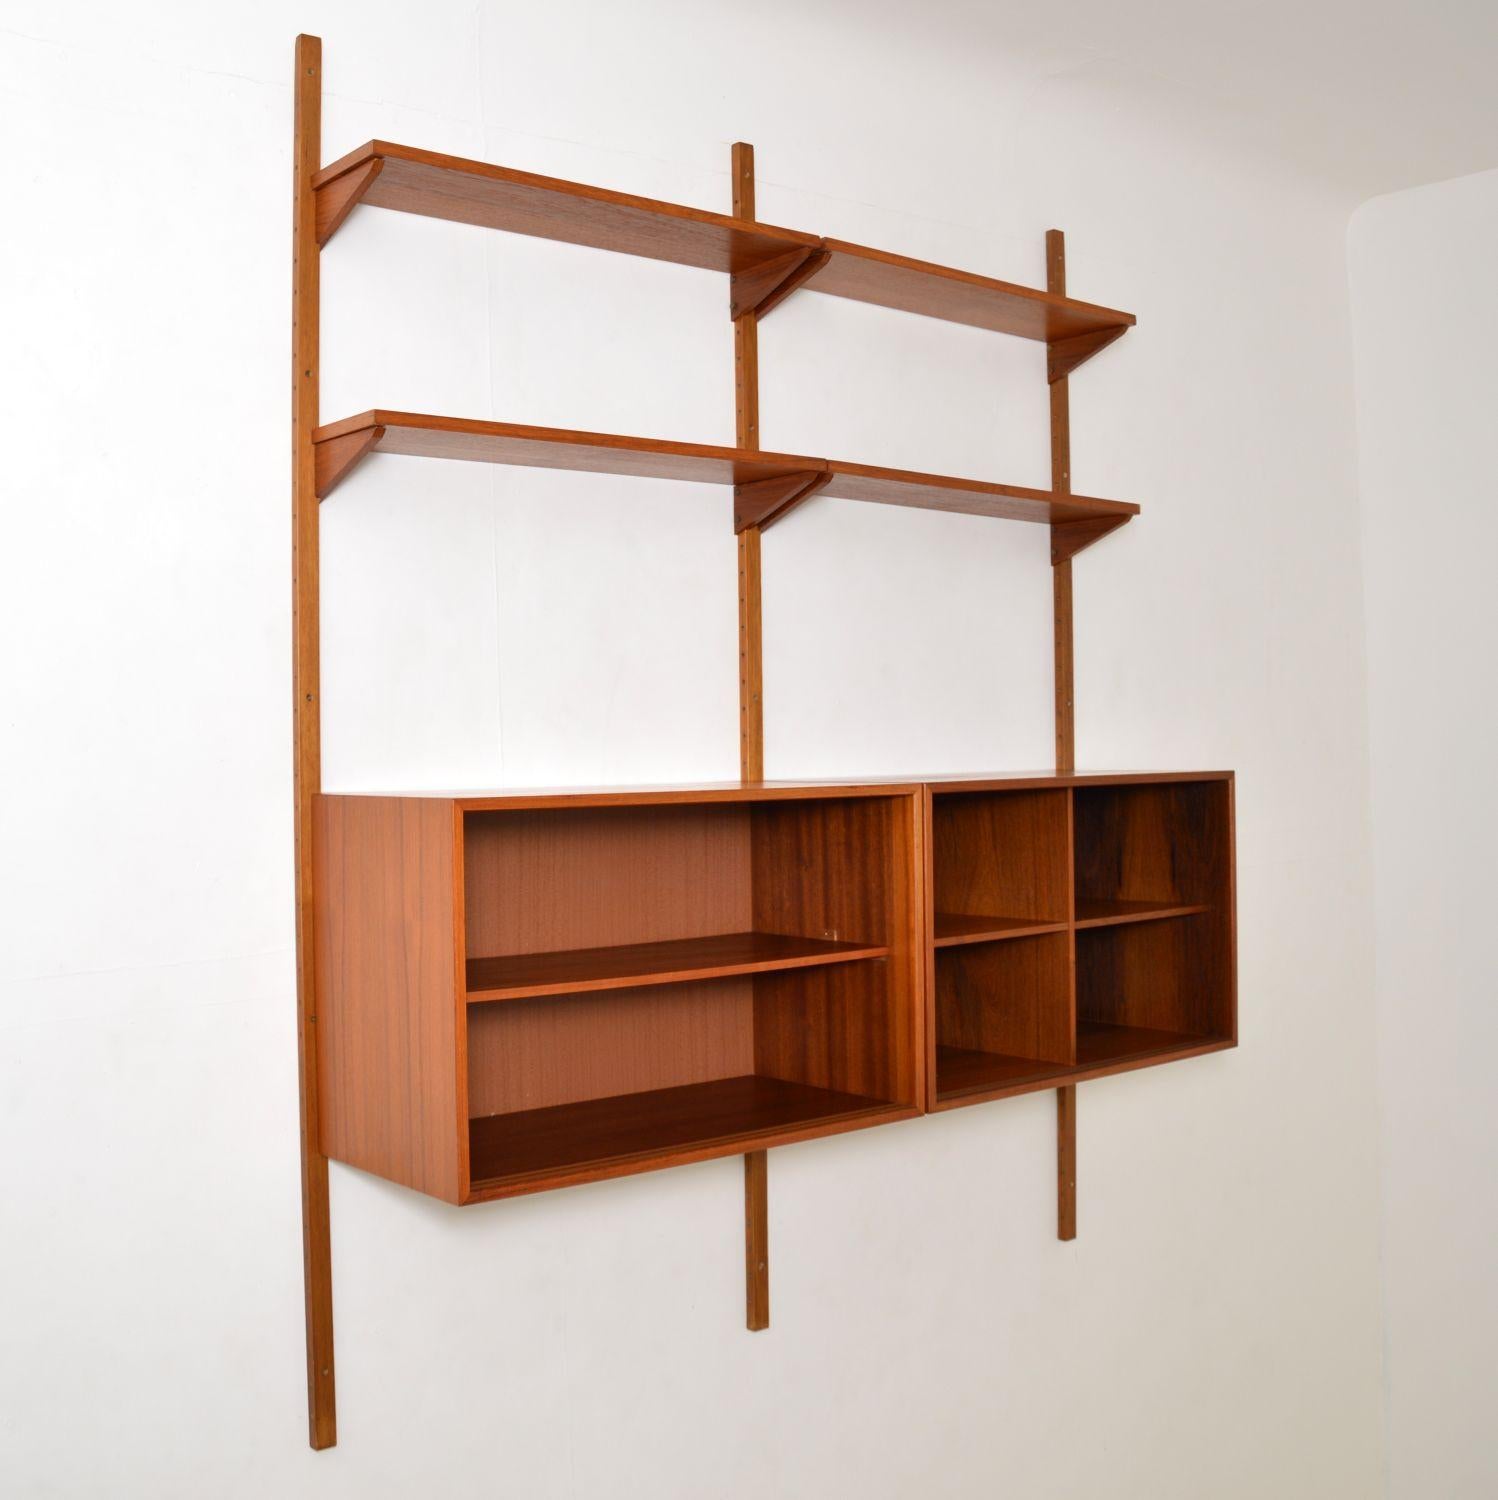 A stylish and versatile wall mounting cabinet in teak, this is the PS system, made in Denmark in the 1960s.

This double bay consists of two sliding door cabinets, four chevron supported shelves, and three long wall mounting rails. The cabinets